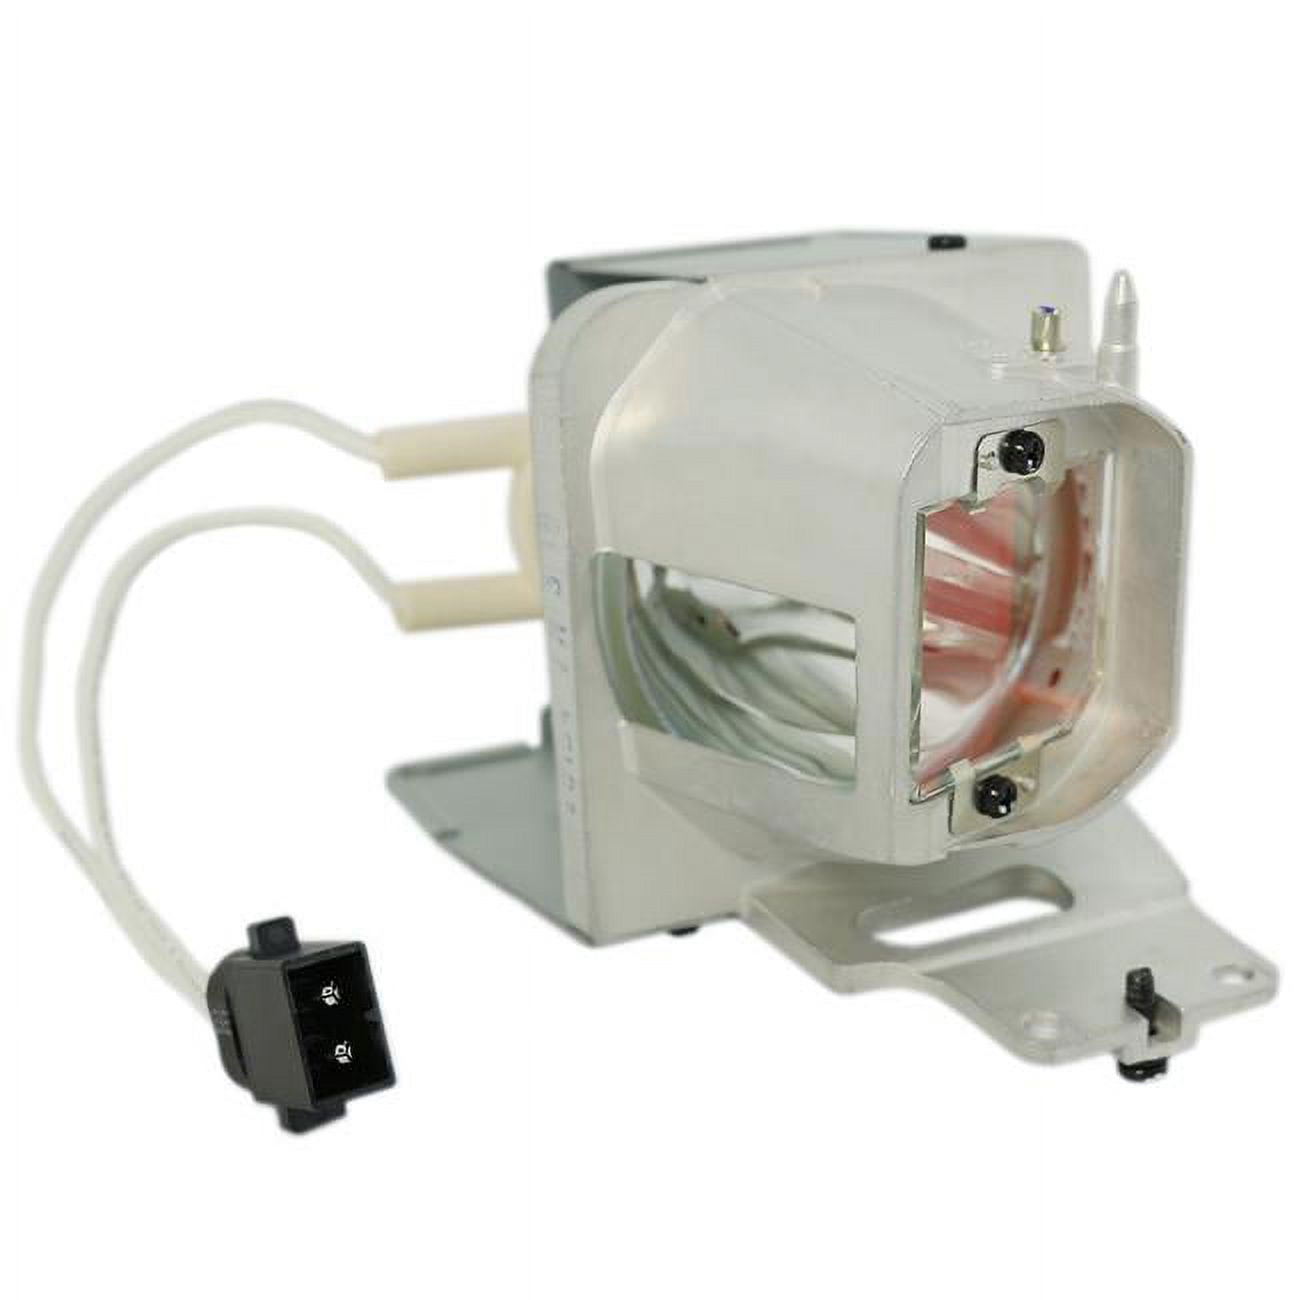 Acer MR.JHF11.002 Compatible Projector Lamp Module -  Aish, AI1333434